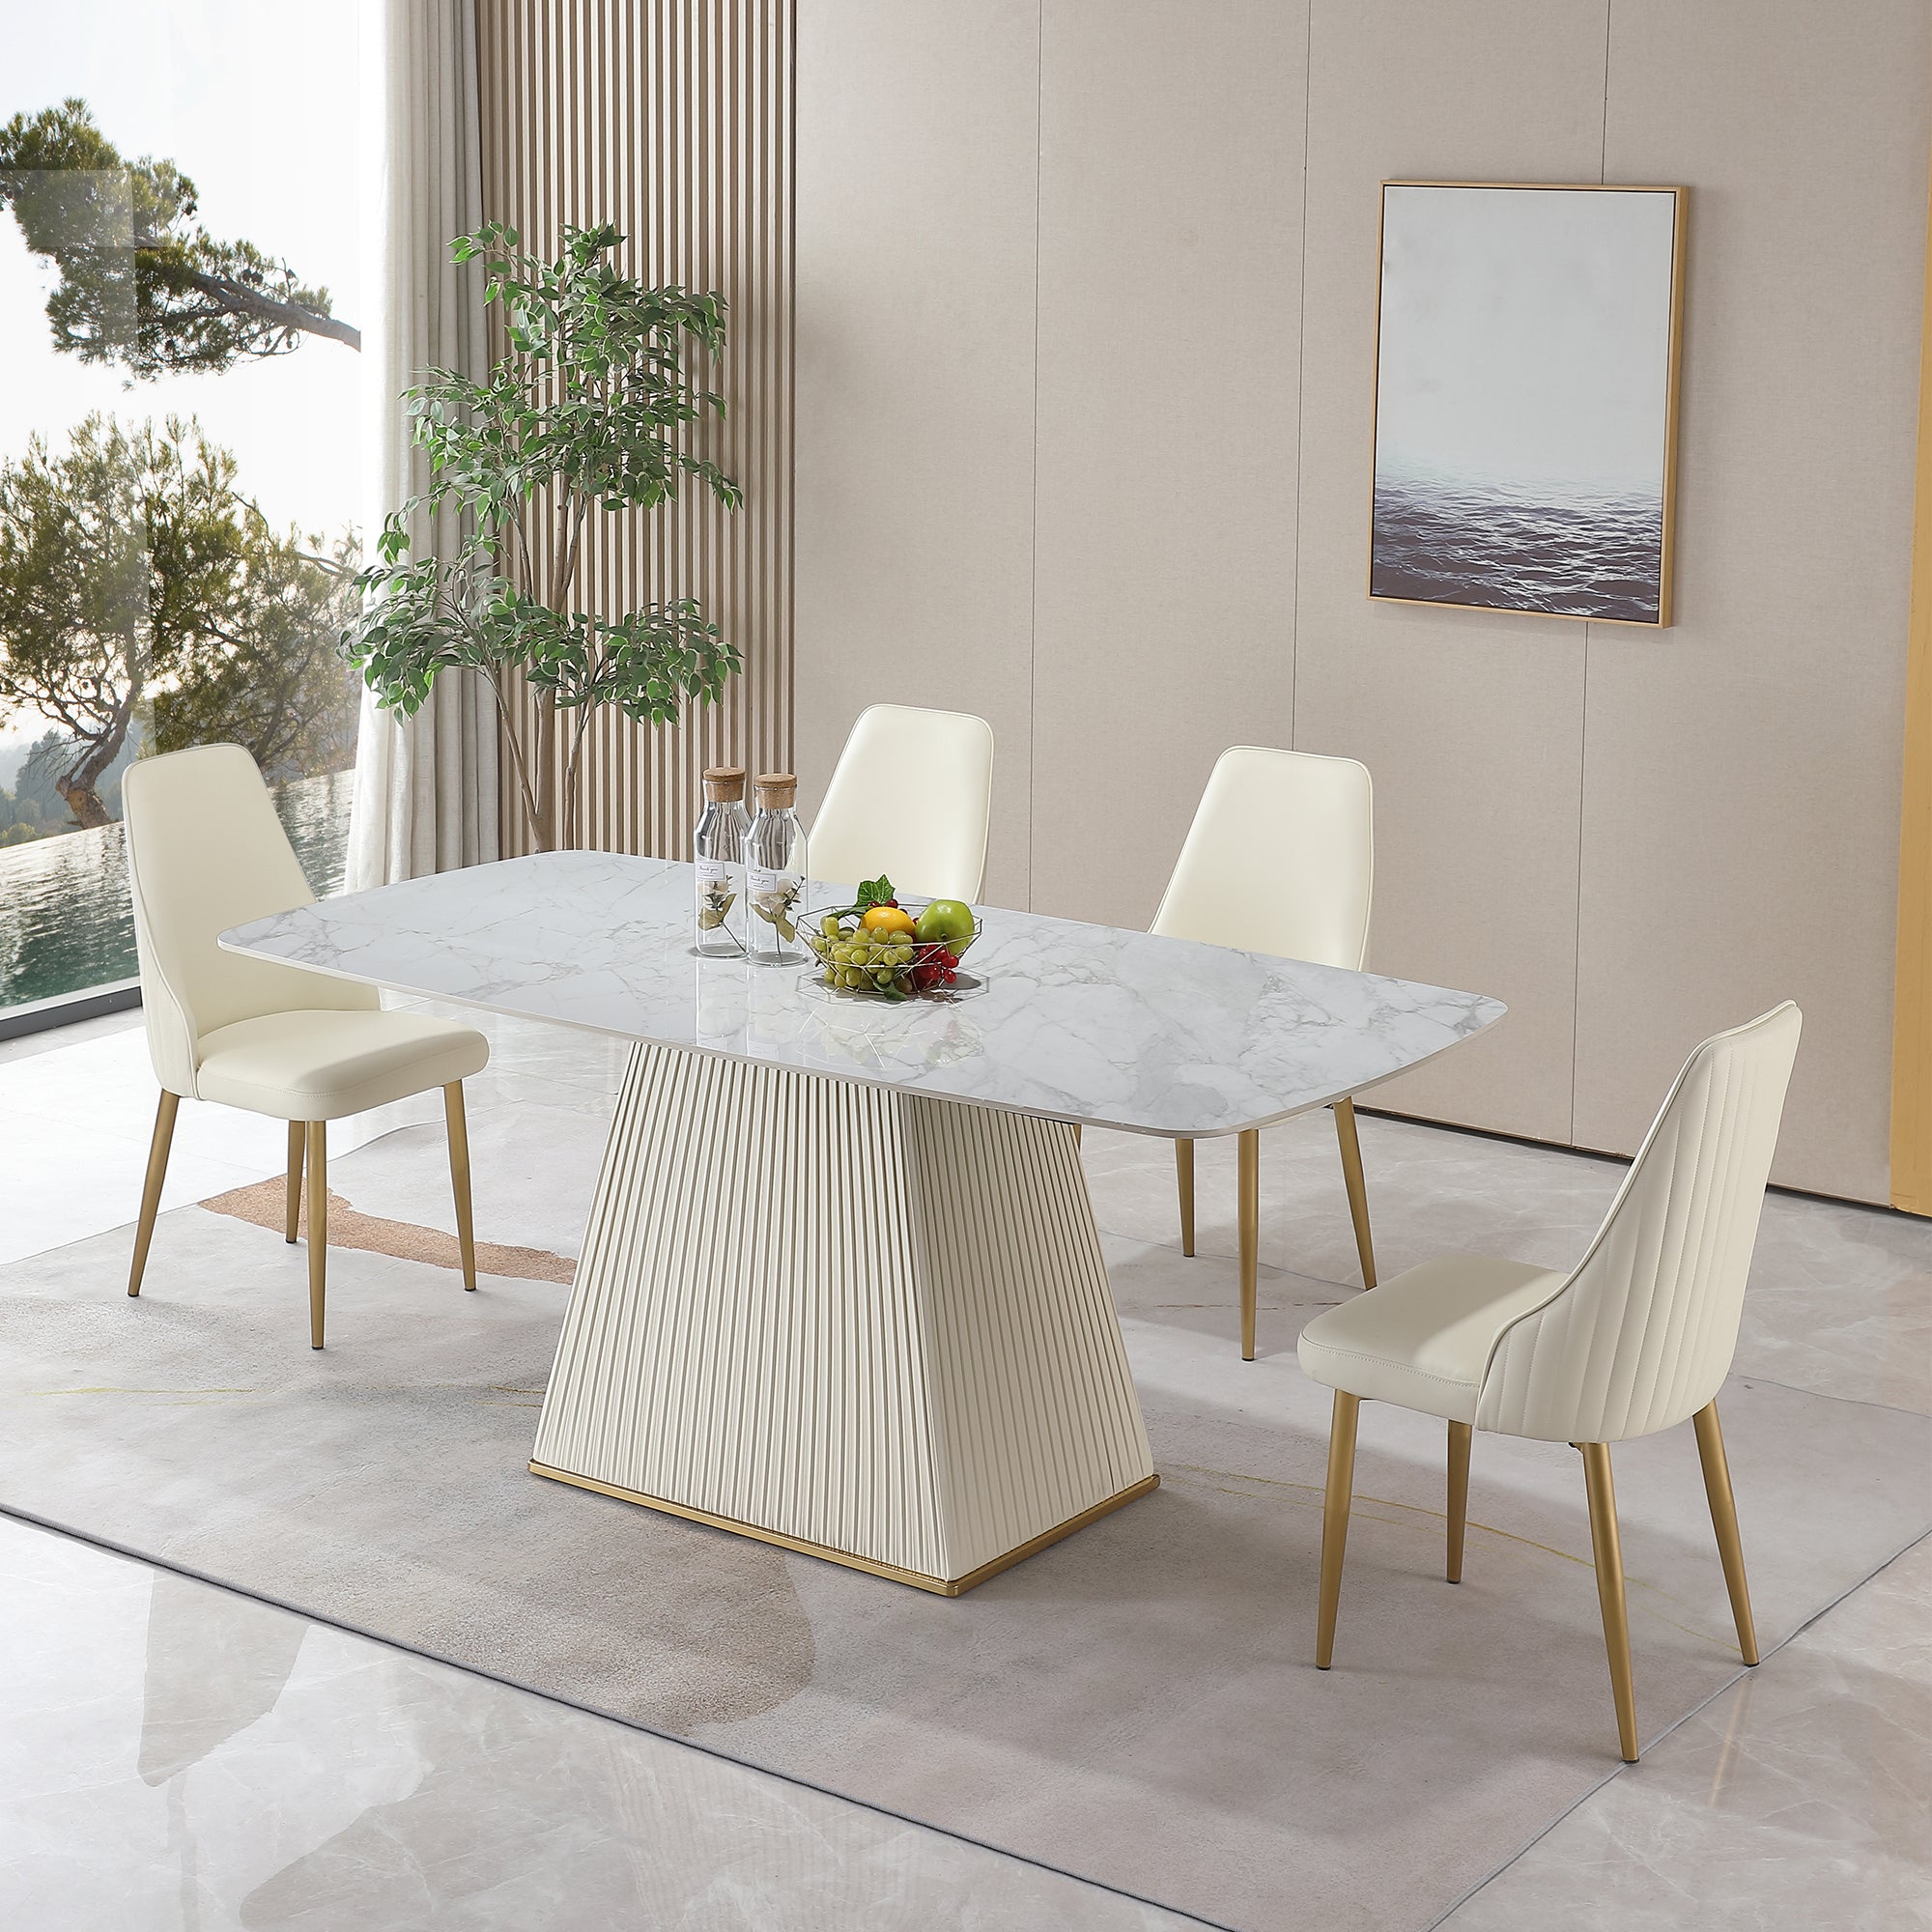 Montary® 71" Contemporary Dining Table Sintered Stone Square Pedestal Base with 6 pcs Chairs